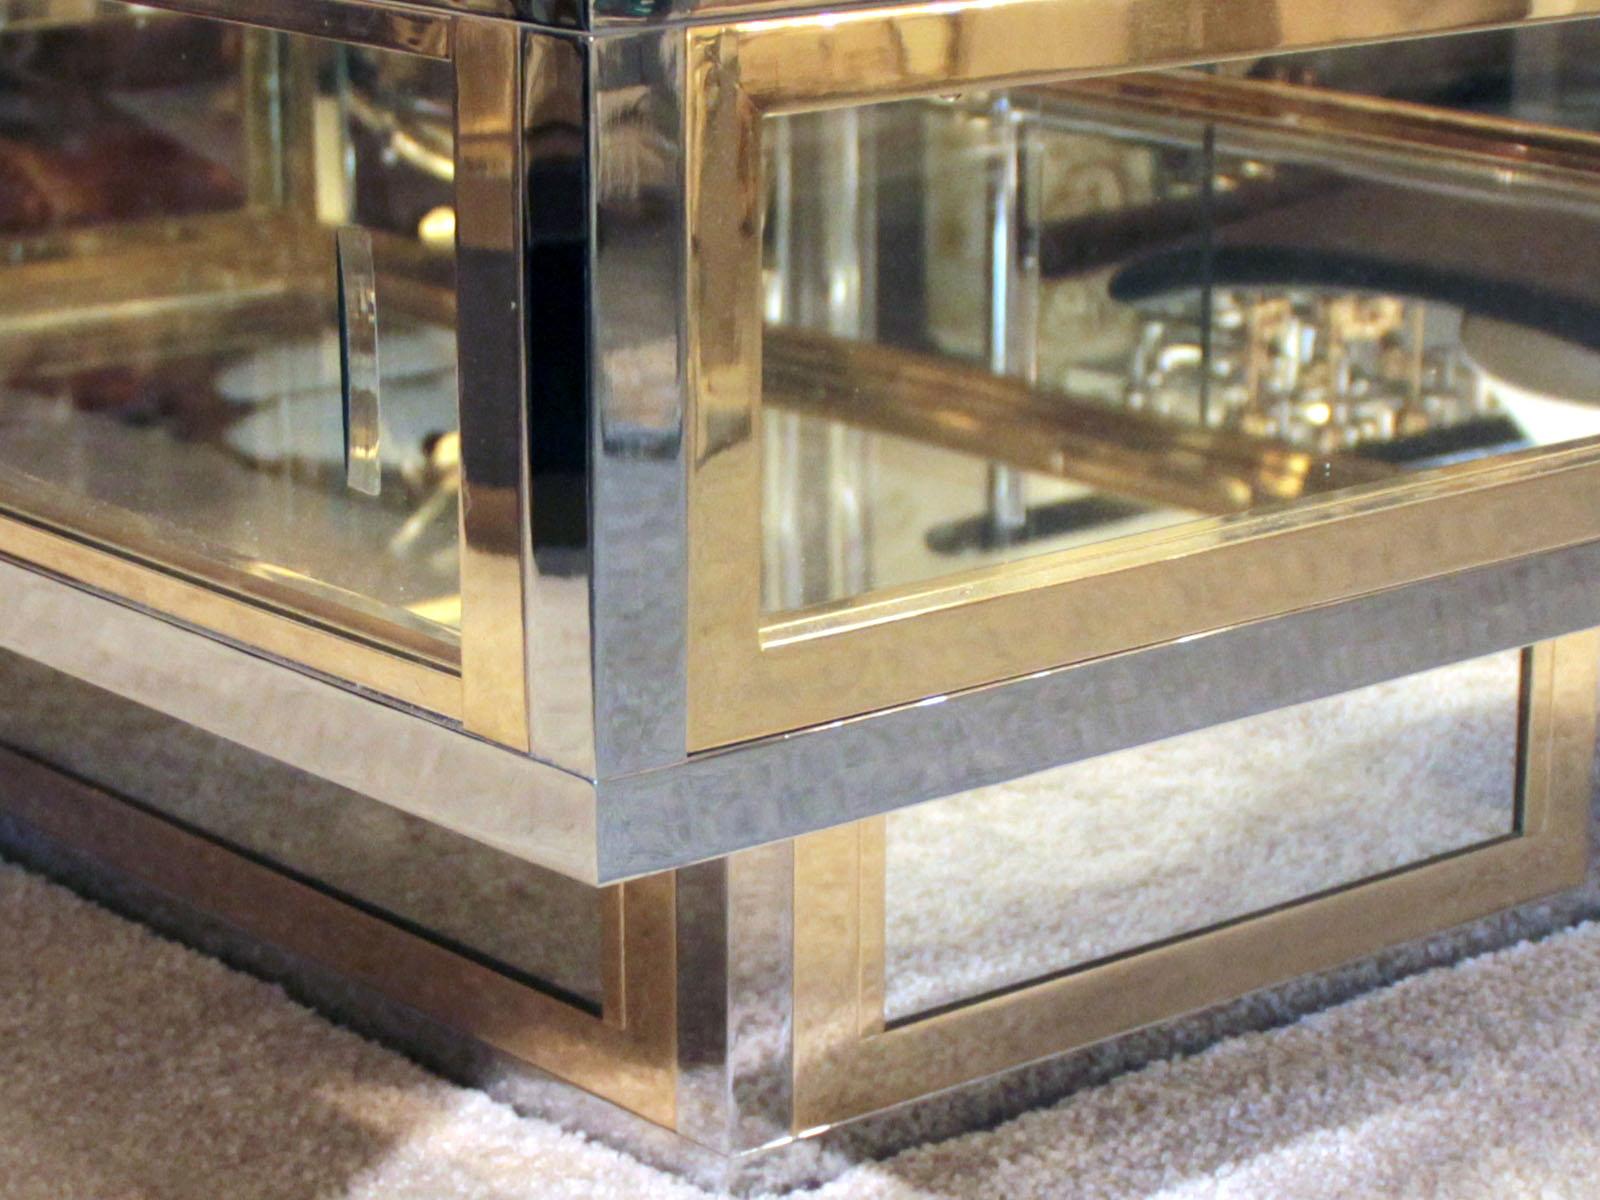 1970s showcase coffee table in the taste of Romeo Rega, in chrome, polished brass and clear glass, with two sliding glass sides.
The bottom of the showcase is in mirror.